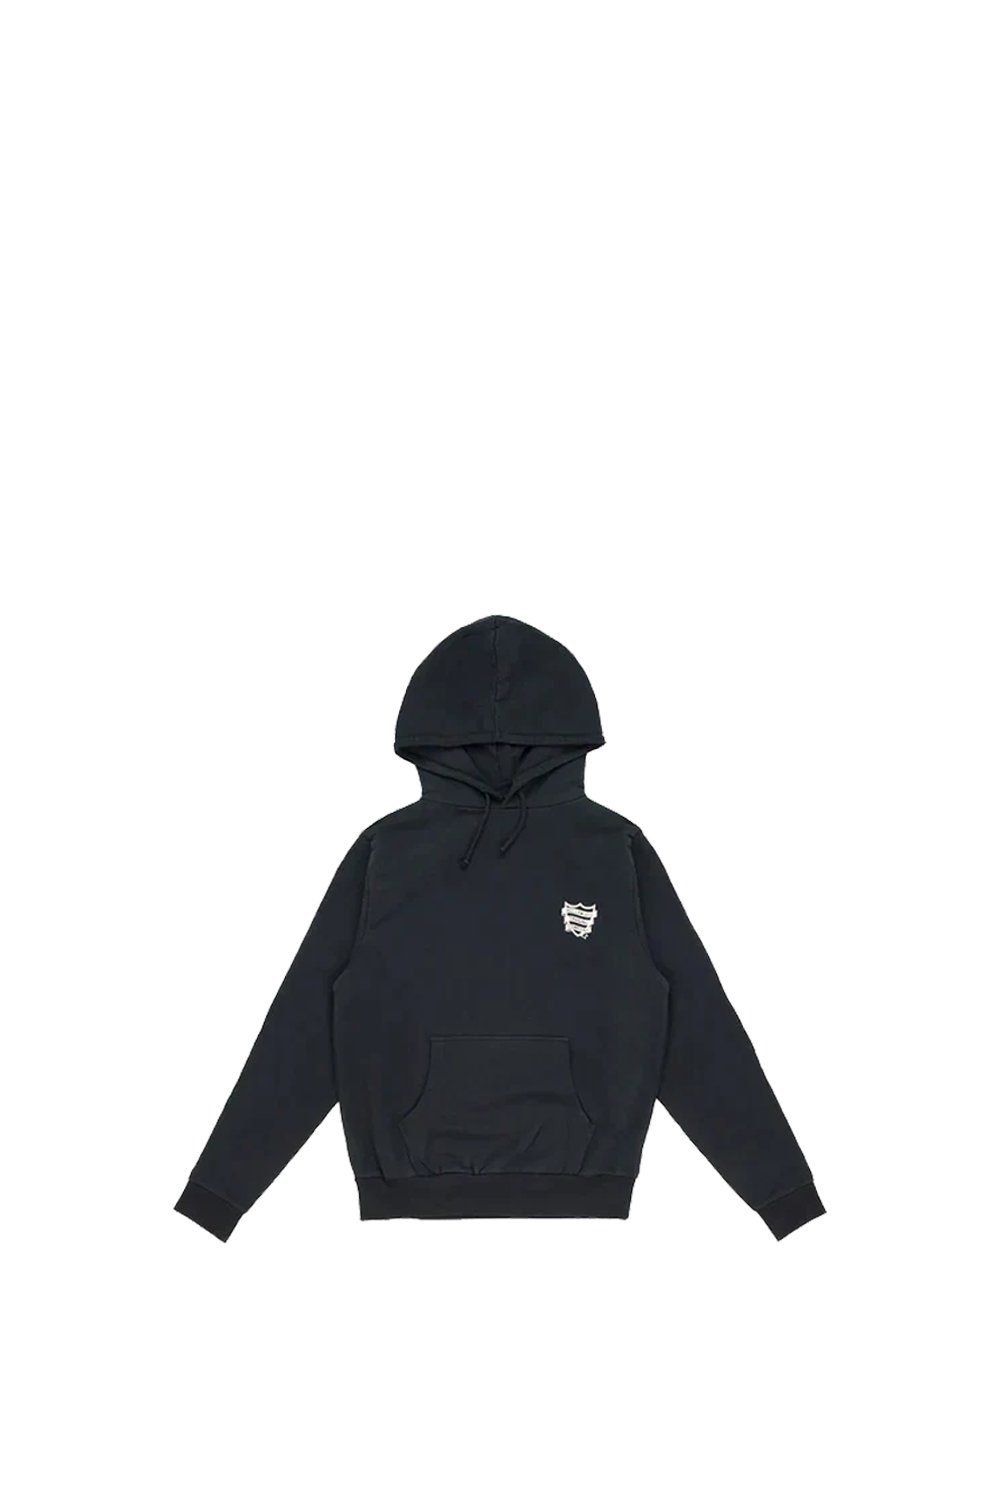 LIL SHIELD HOODIE Regular fit hoodie. Hood with drawstring, ribbed cuffs and hem. One front kangaroo pocket. Lil Shield Logo. Composition: 100% Cotton HTC LOS ANGELES